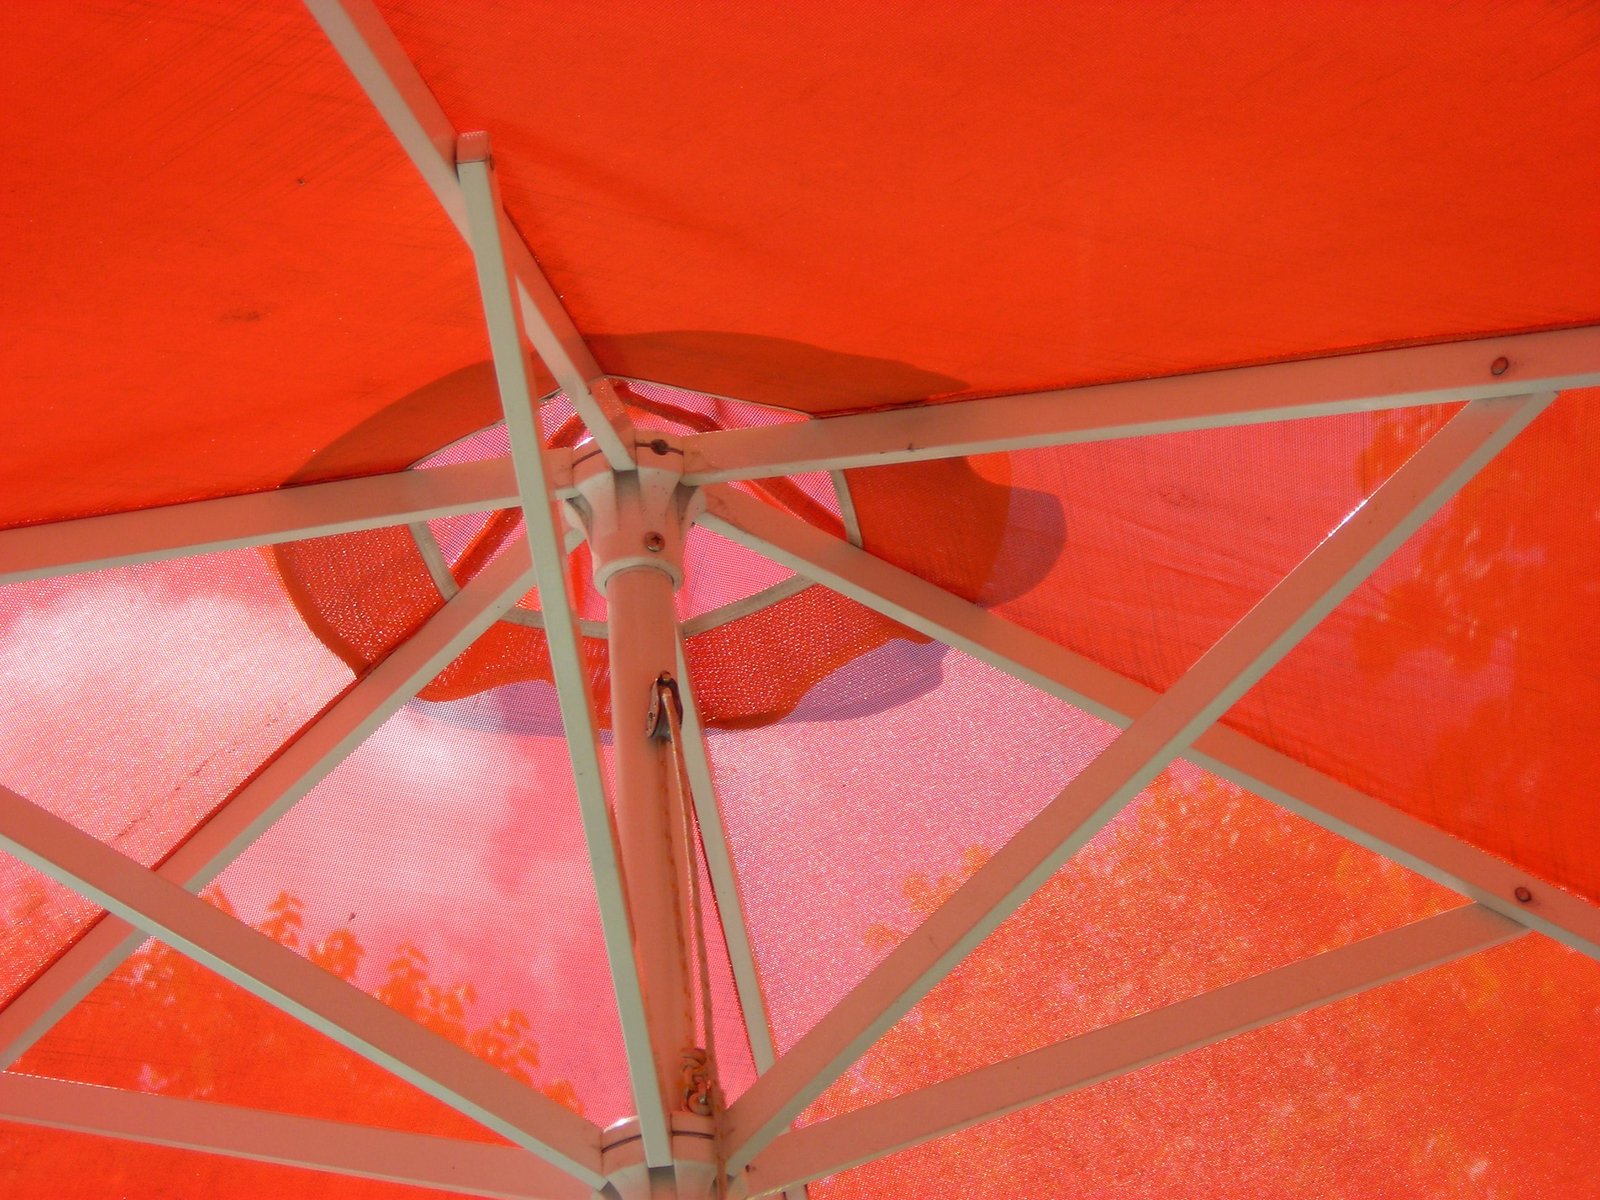 a red and yellow umbrella is open on a sandy beach